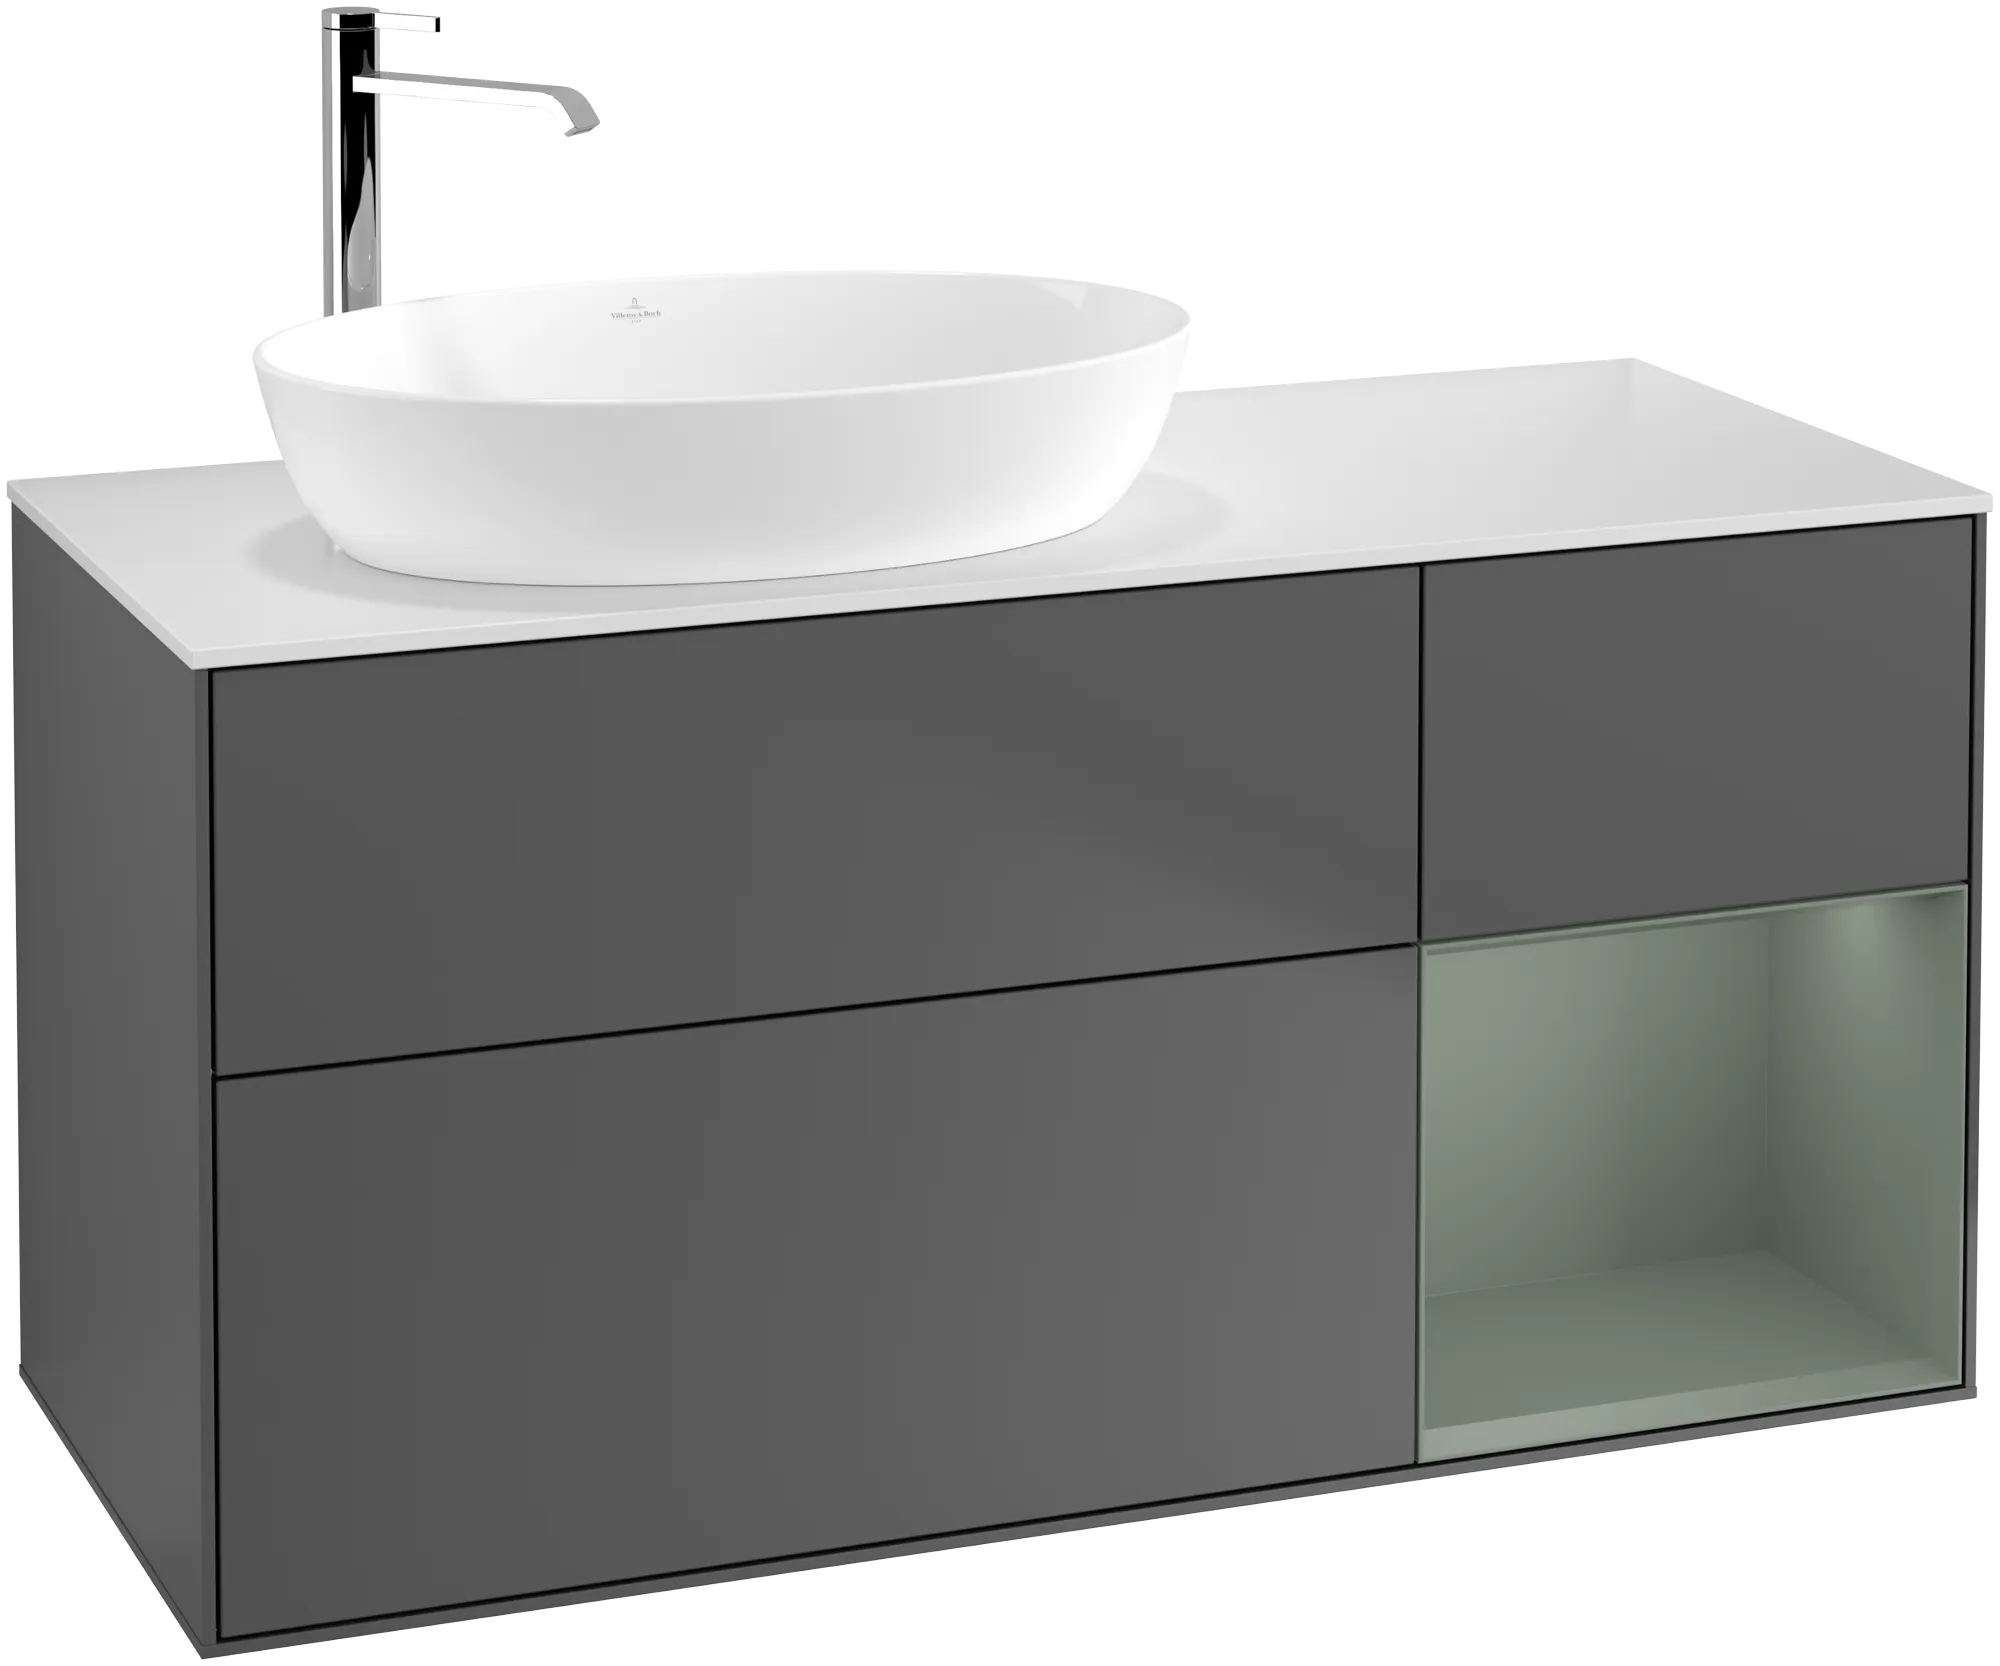 Obrázek VILLEROY BOCH Finion Vanity unit, with lighting, 3 pull-out compartments, 1200 x 603 x 501 mm, Anthracite Matt Lacquer / Olive Matt Lacquer / Glass White Matt #G931GMGK